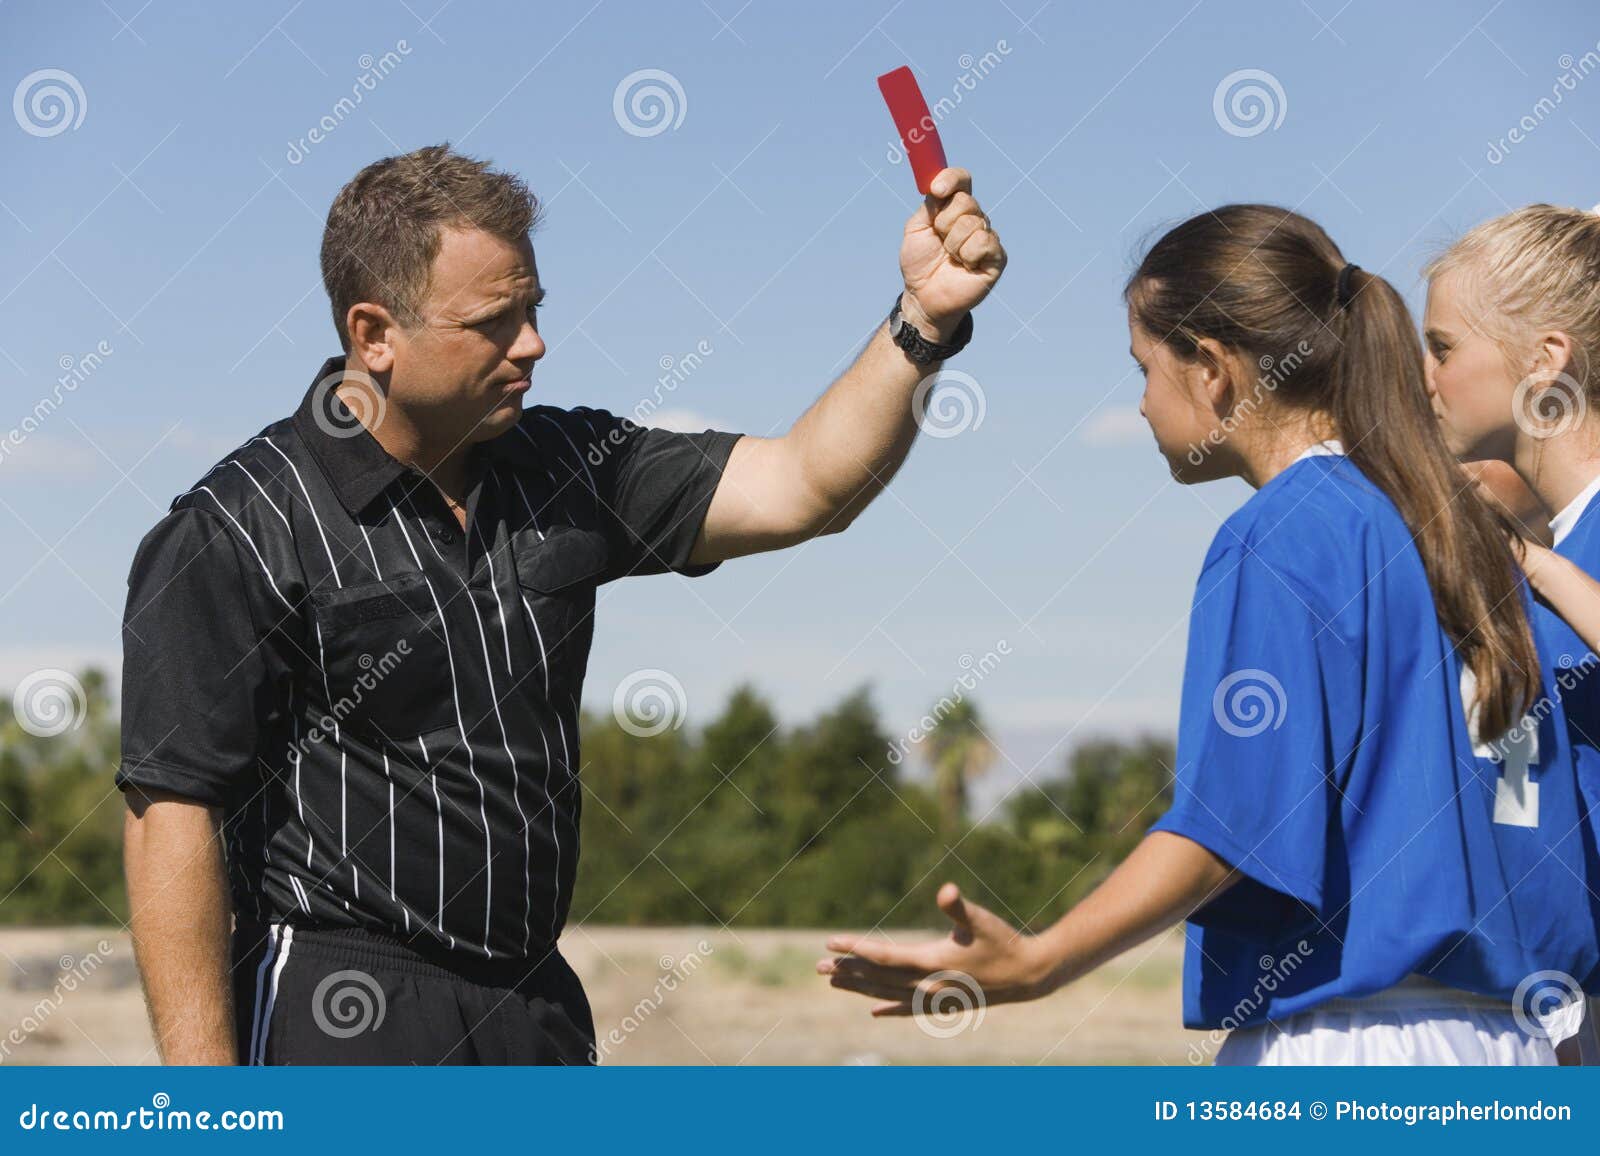 Red Card Stock Photo